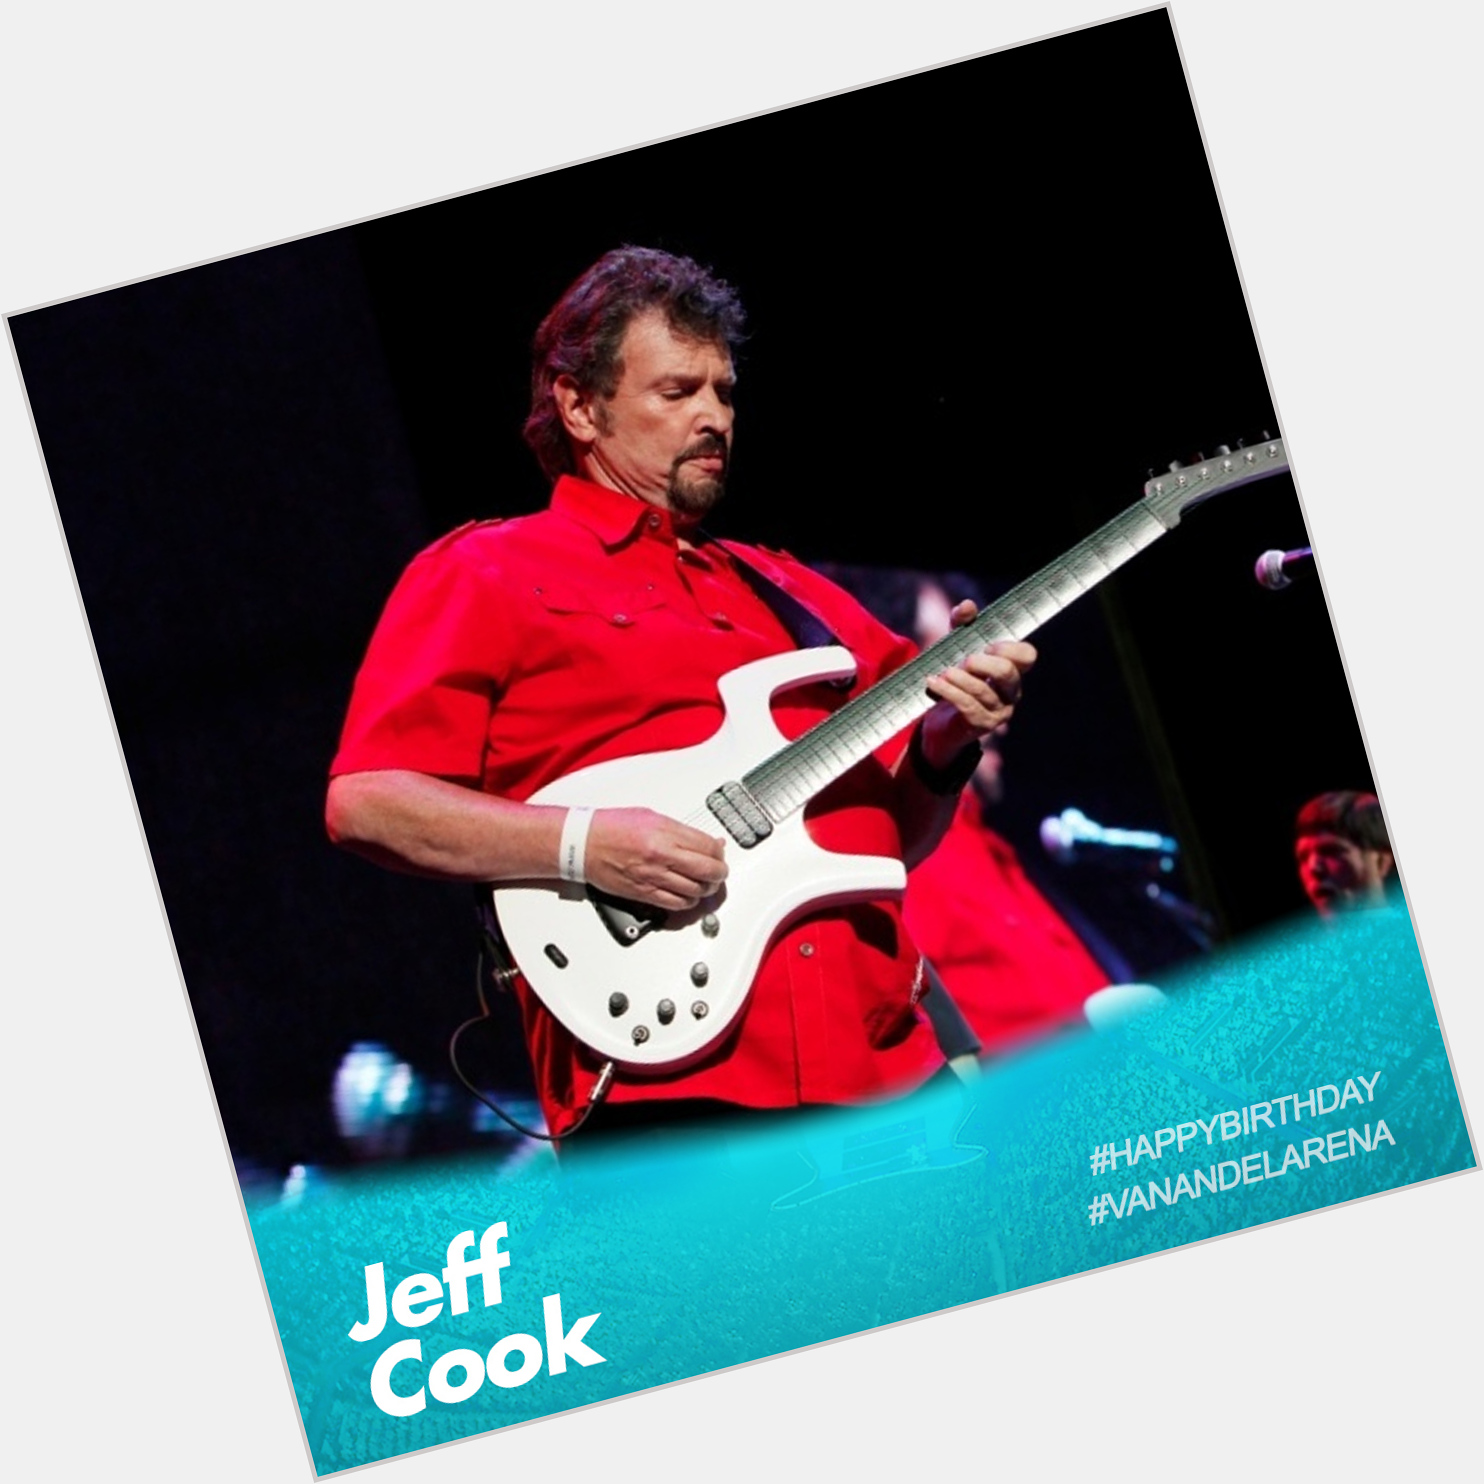 Wishing a happy birthday to member Jeff Cook today!  